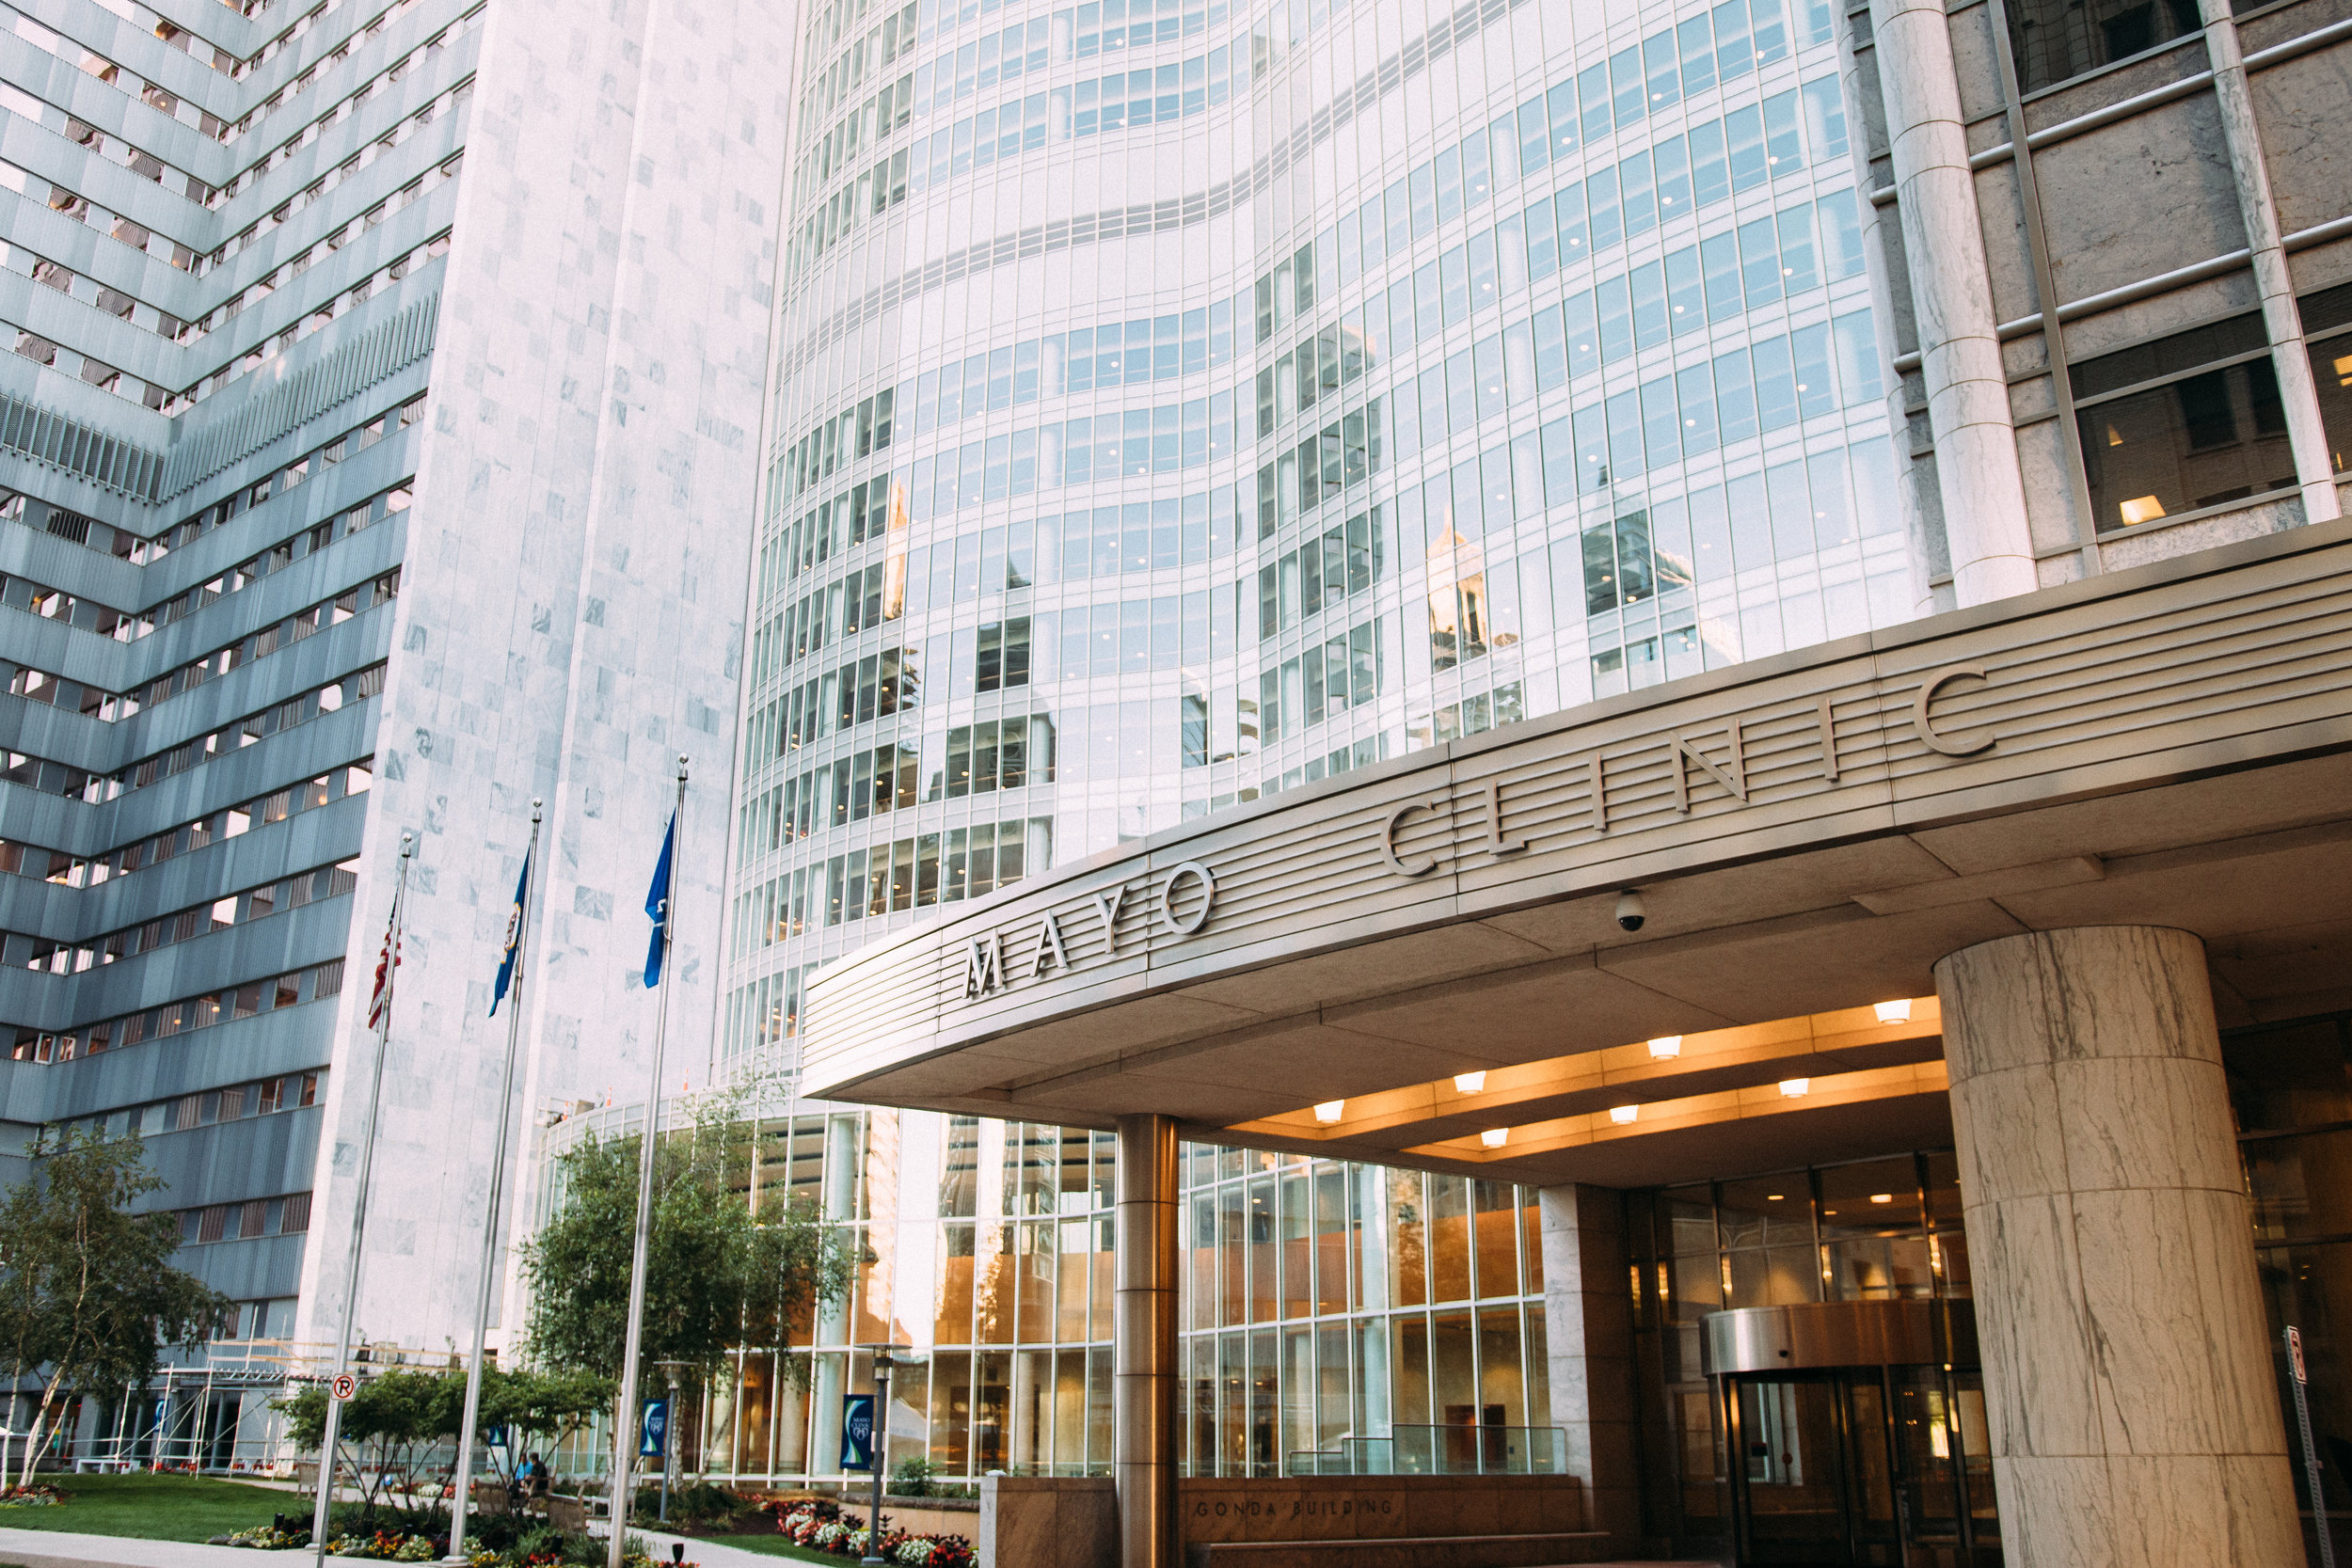 Mayo Clinic retains top spot on 201718 rankings of America's top hospitals